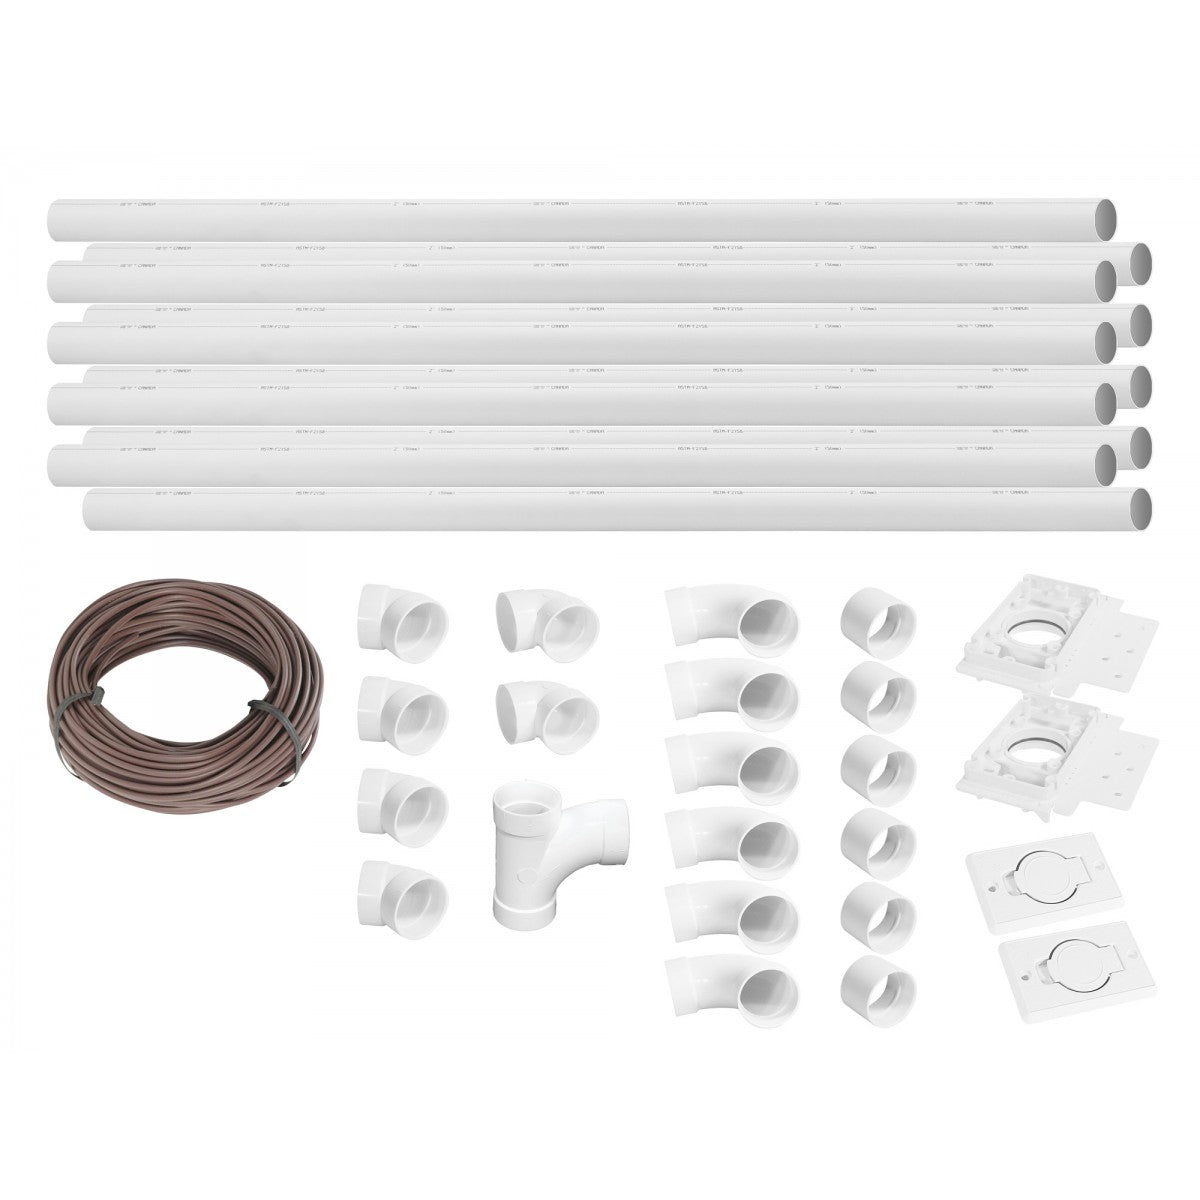 Installation Kit for Central Vacuum - 2 Inlets - 50' (15 m) Piping - with Accessories